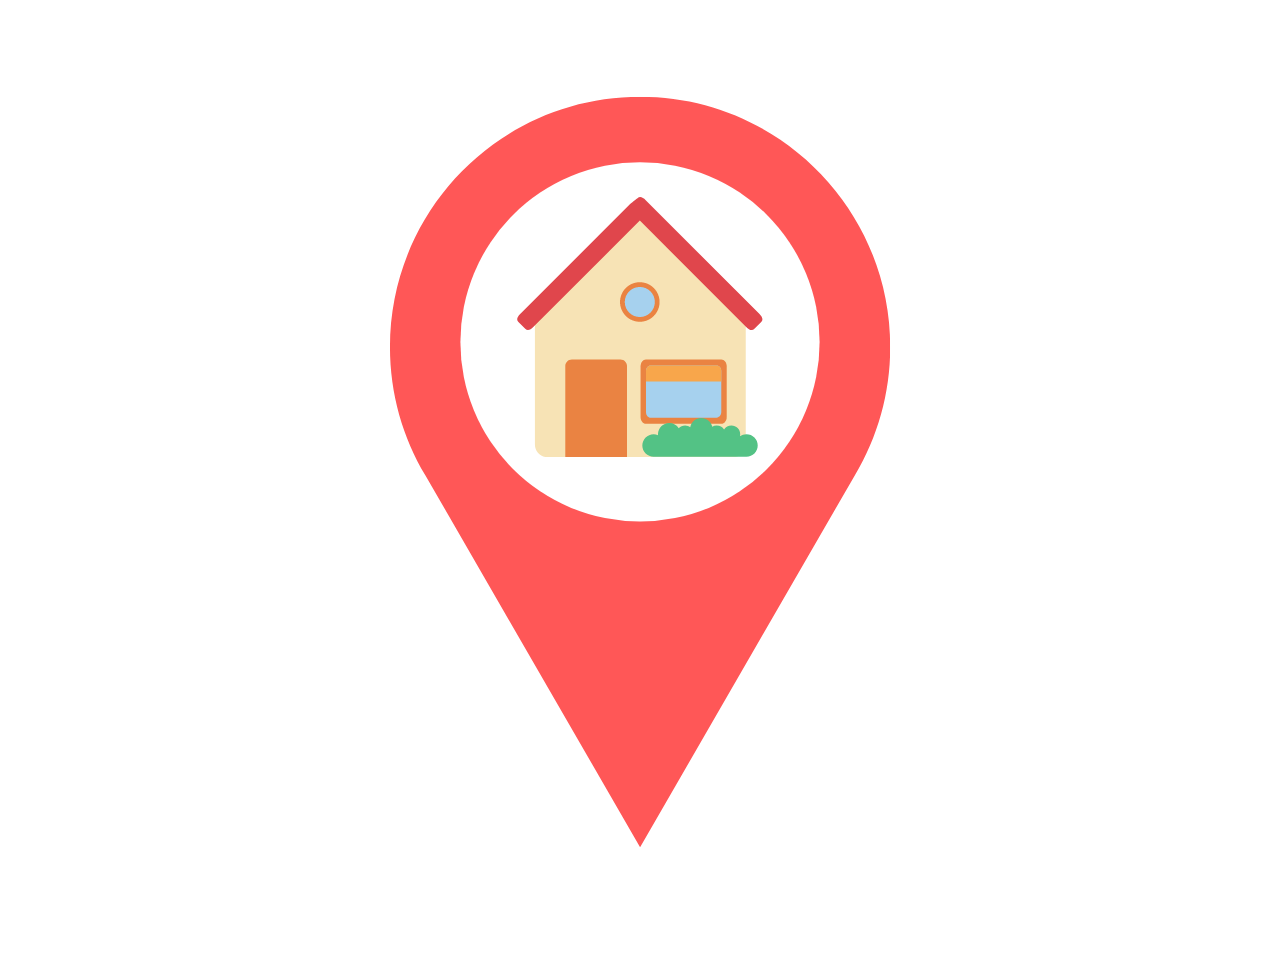 House in a location pin icon